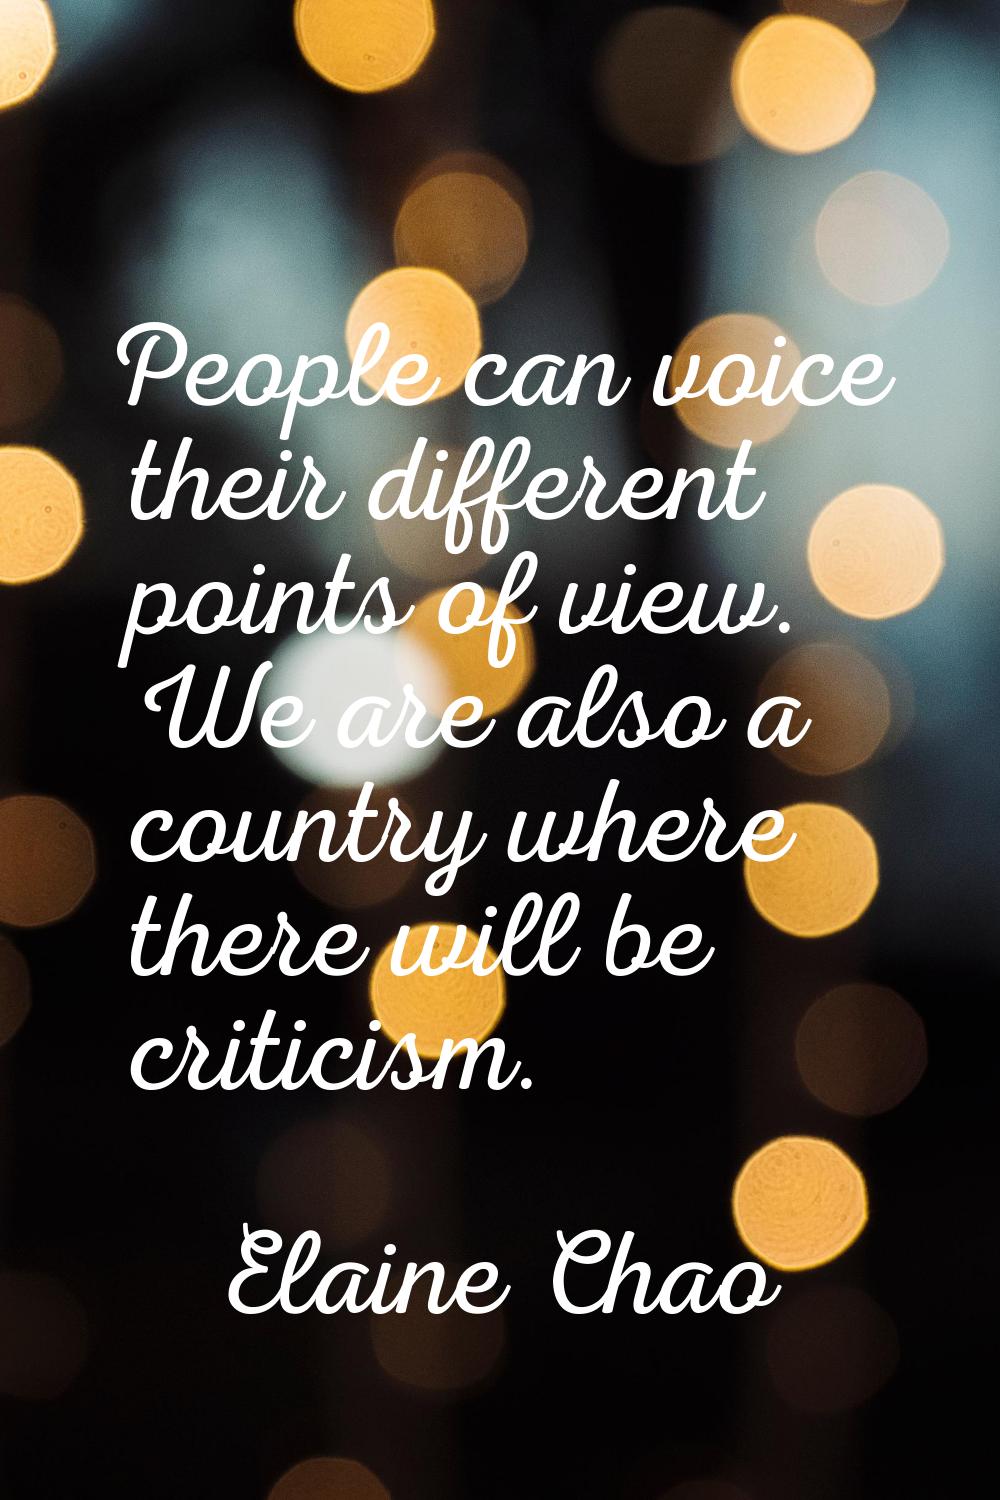 People can voice their different points of view. We are also a country where there will be criticis